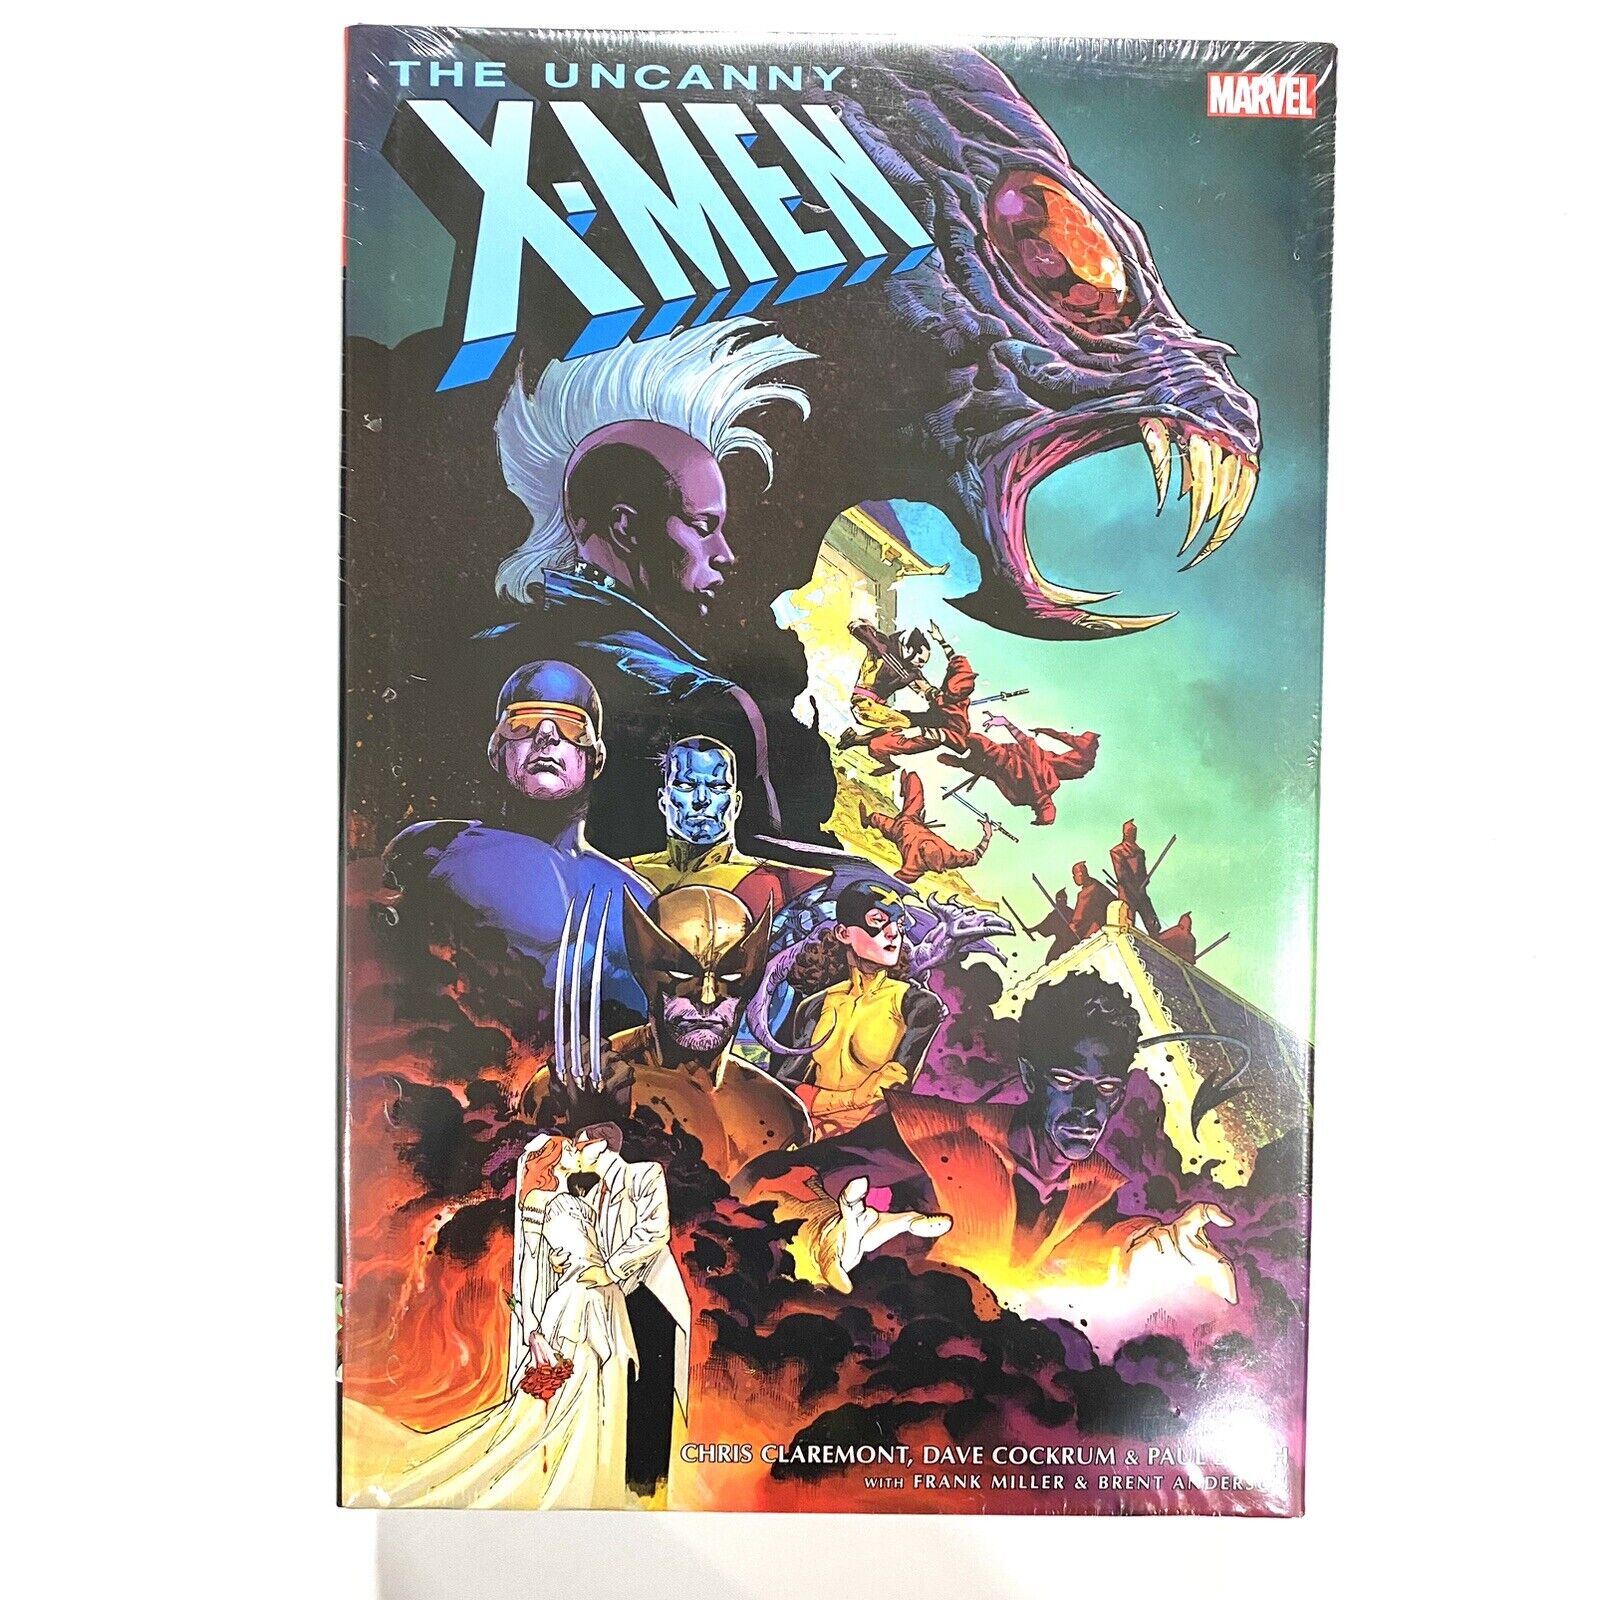 The Uncanny X-Men Omnibus Vol 3 New Sealed Hardcover $5 Flat Combined Shipping